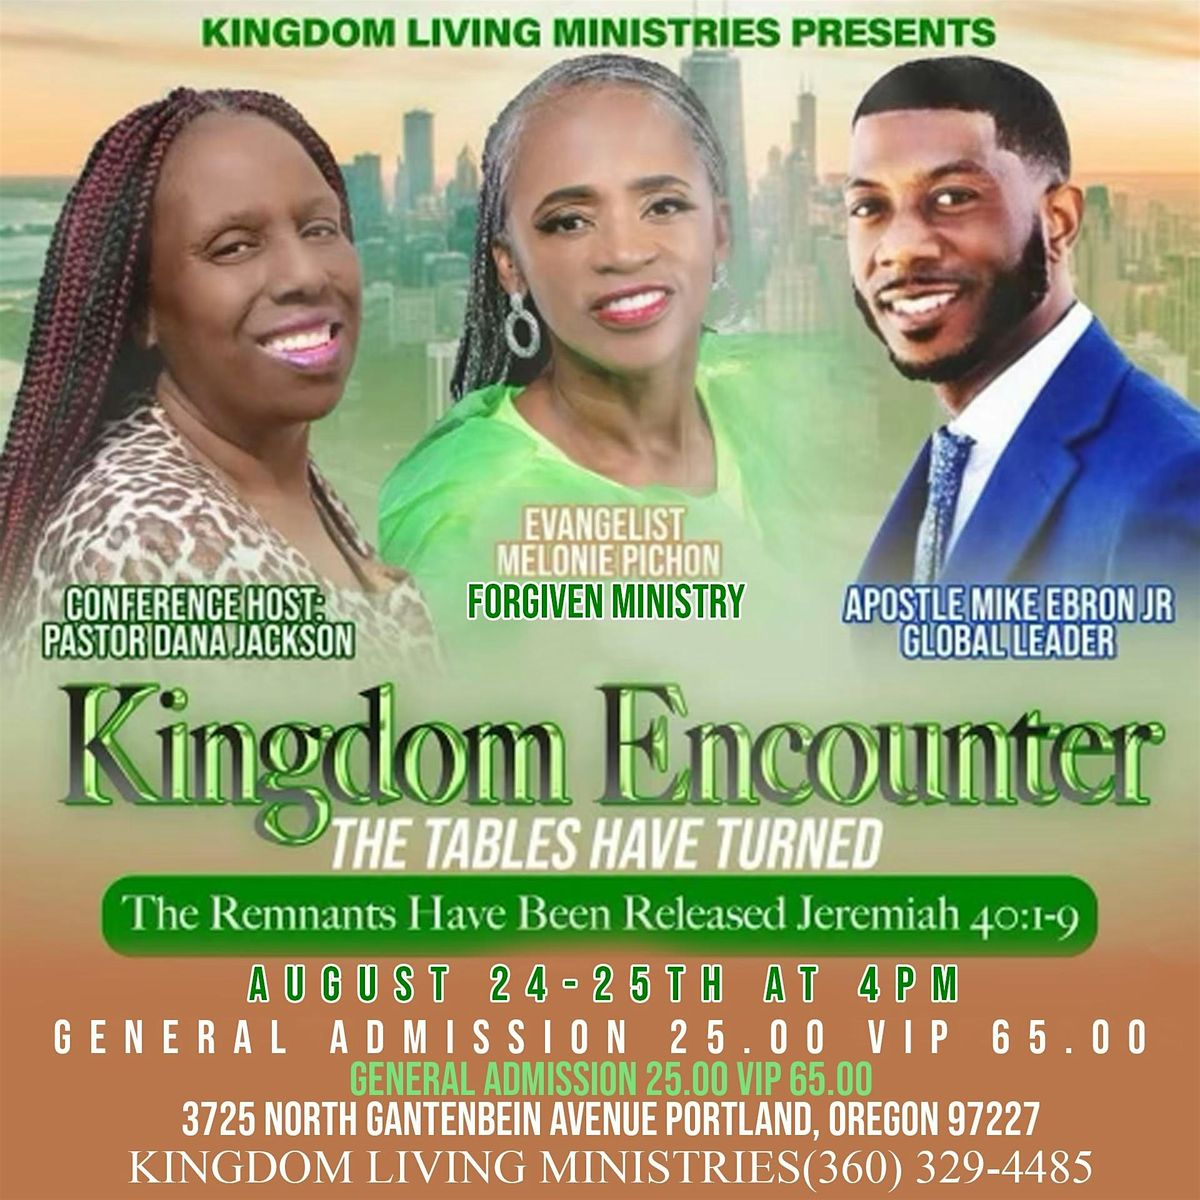 Kingdom Encounter- THE TABLES HAVE TURNED